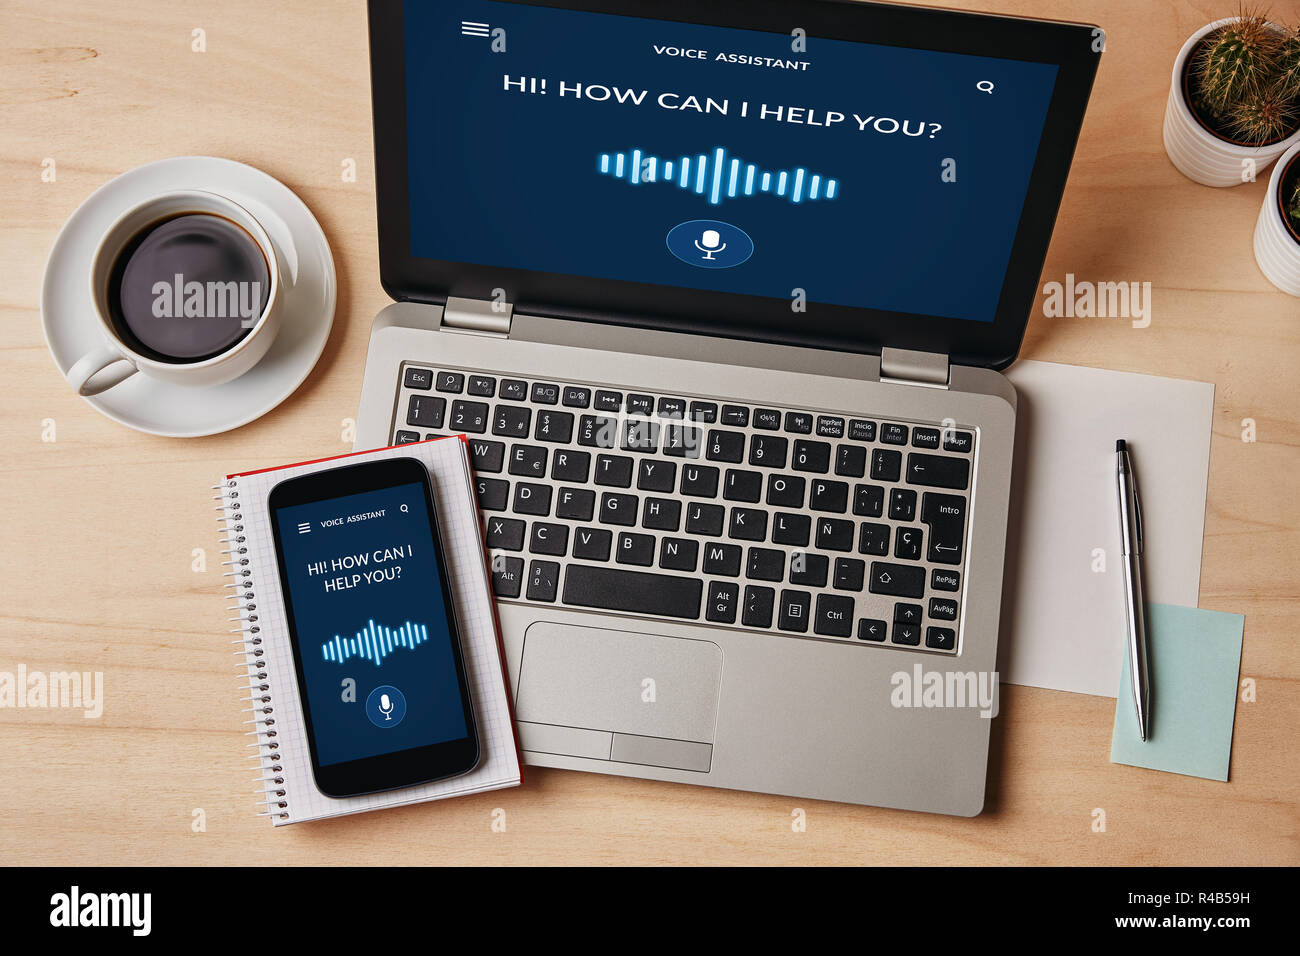 Voice assistant concept on laptop and smartphone screen over wooden table. All screen content is designed by me. Flat lay Stock Photo